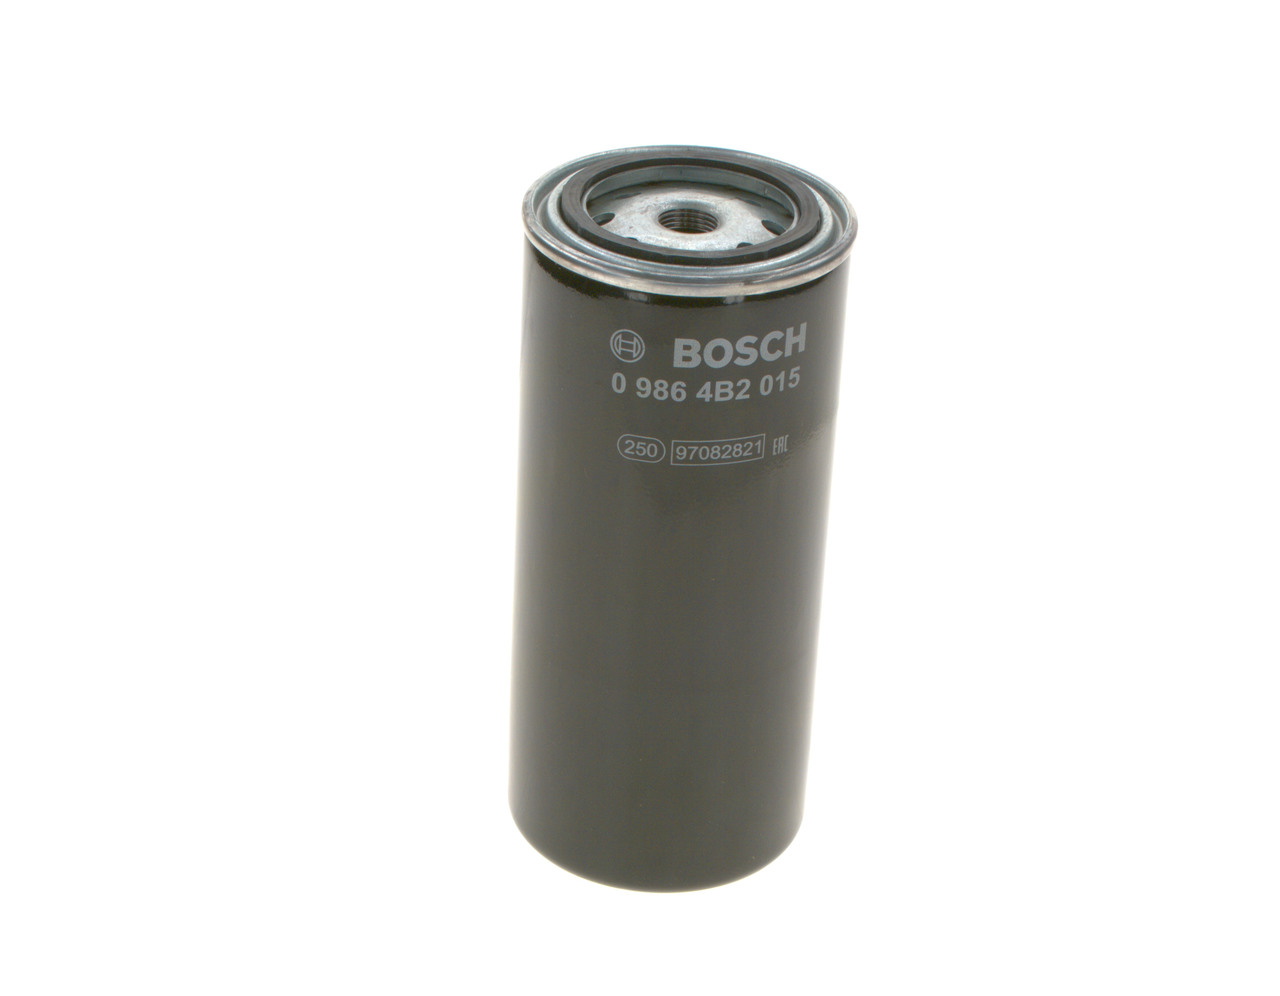 NM 015 BOSCH 09864B2015 Filtro combustible 4207999